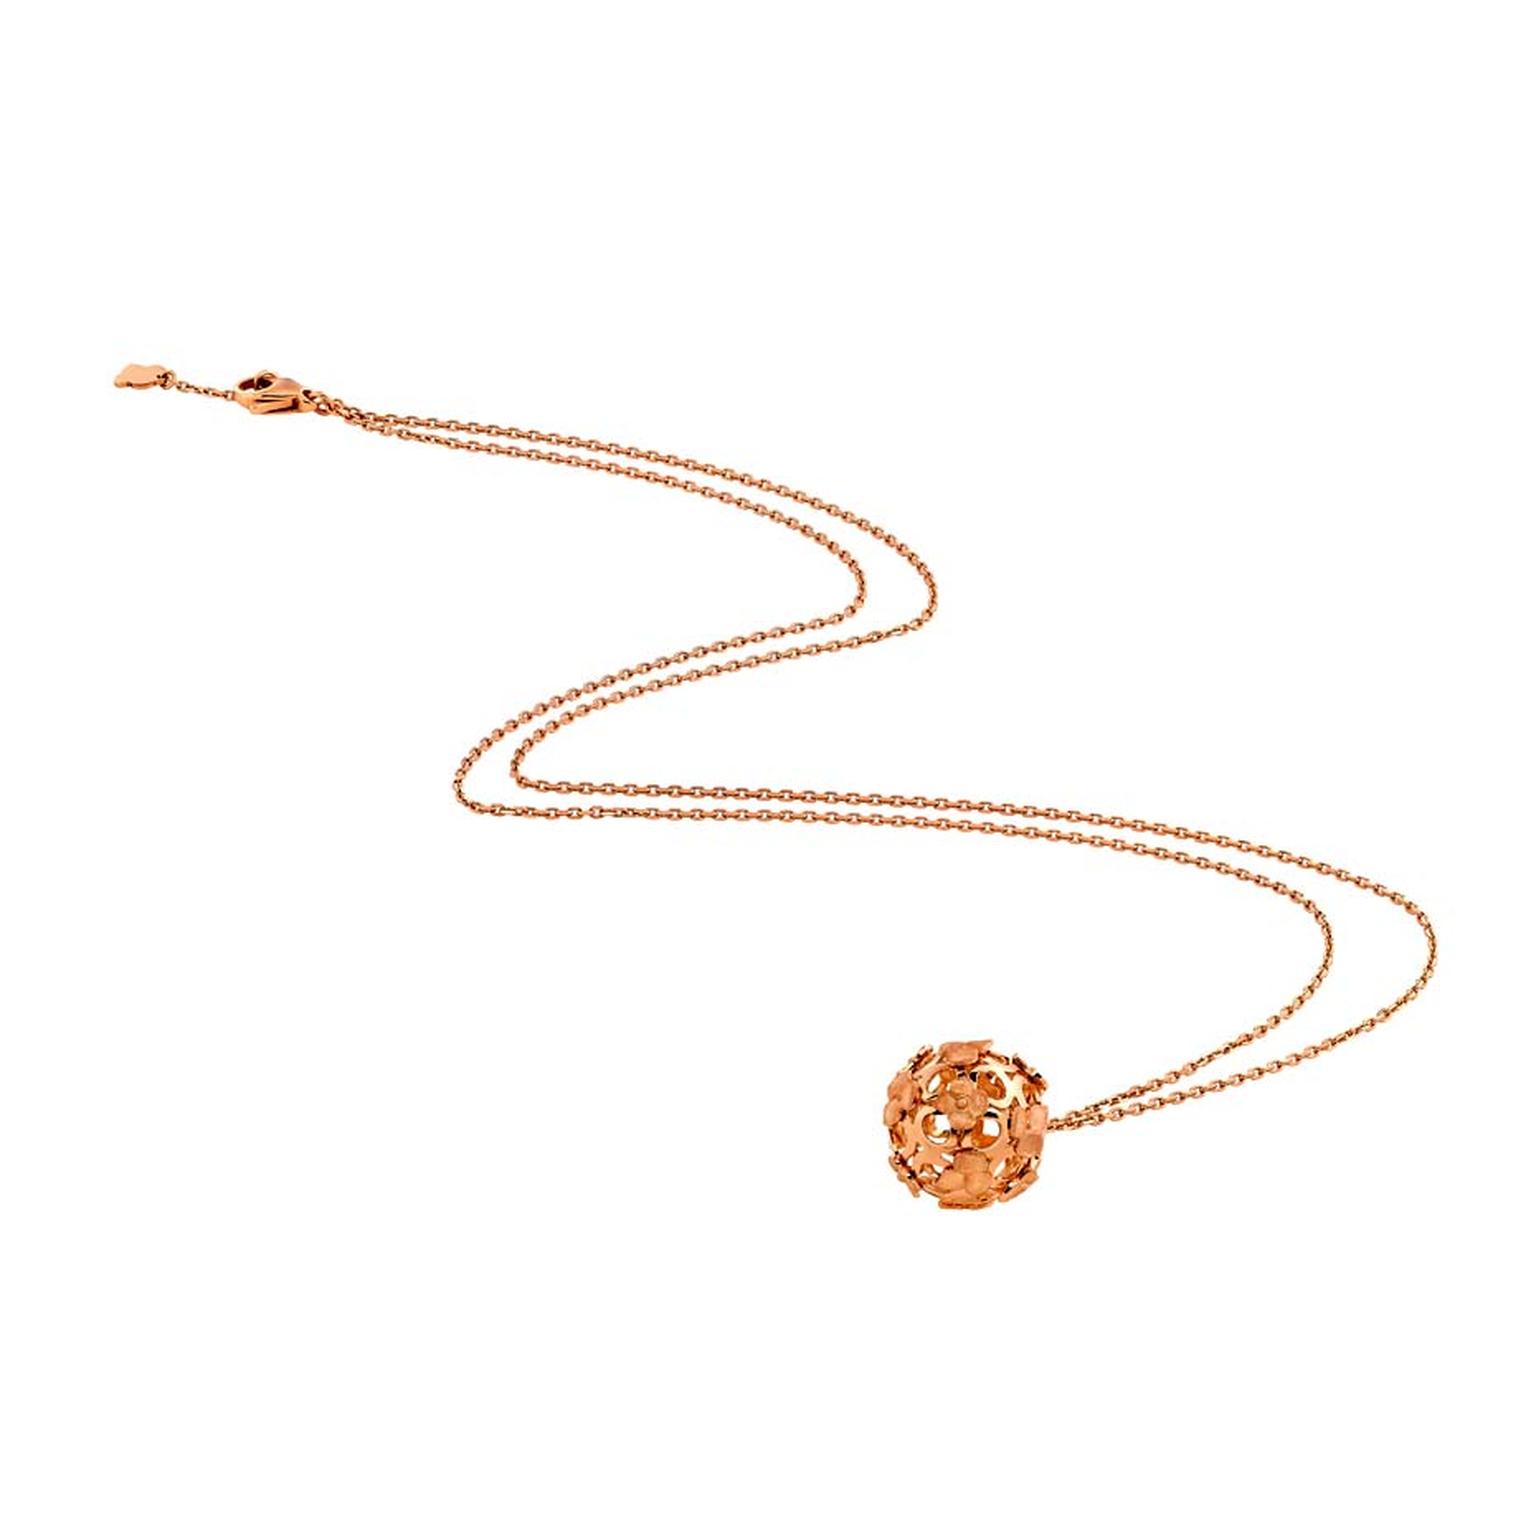 The Chaumet Hortensia necklace hangs fashionably low on a long chain with interlaced rose gold flowers fashioned into a ball, inspired by the round shape of the hydrangea flower (£2,030).